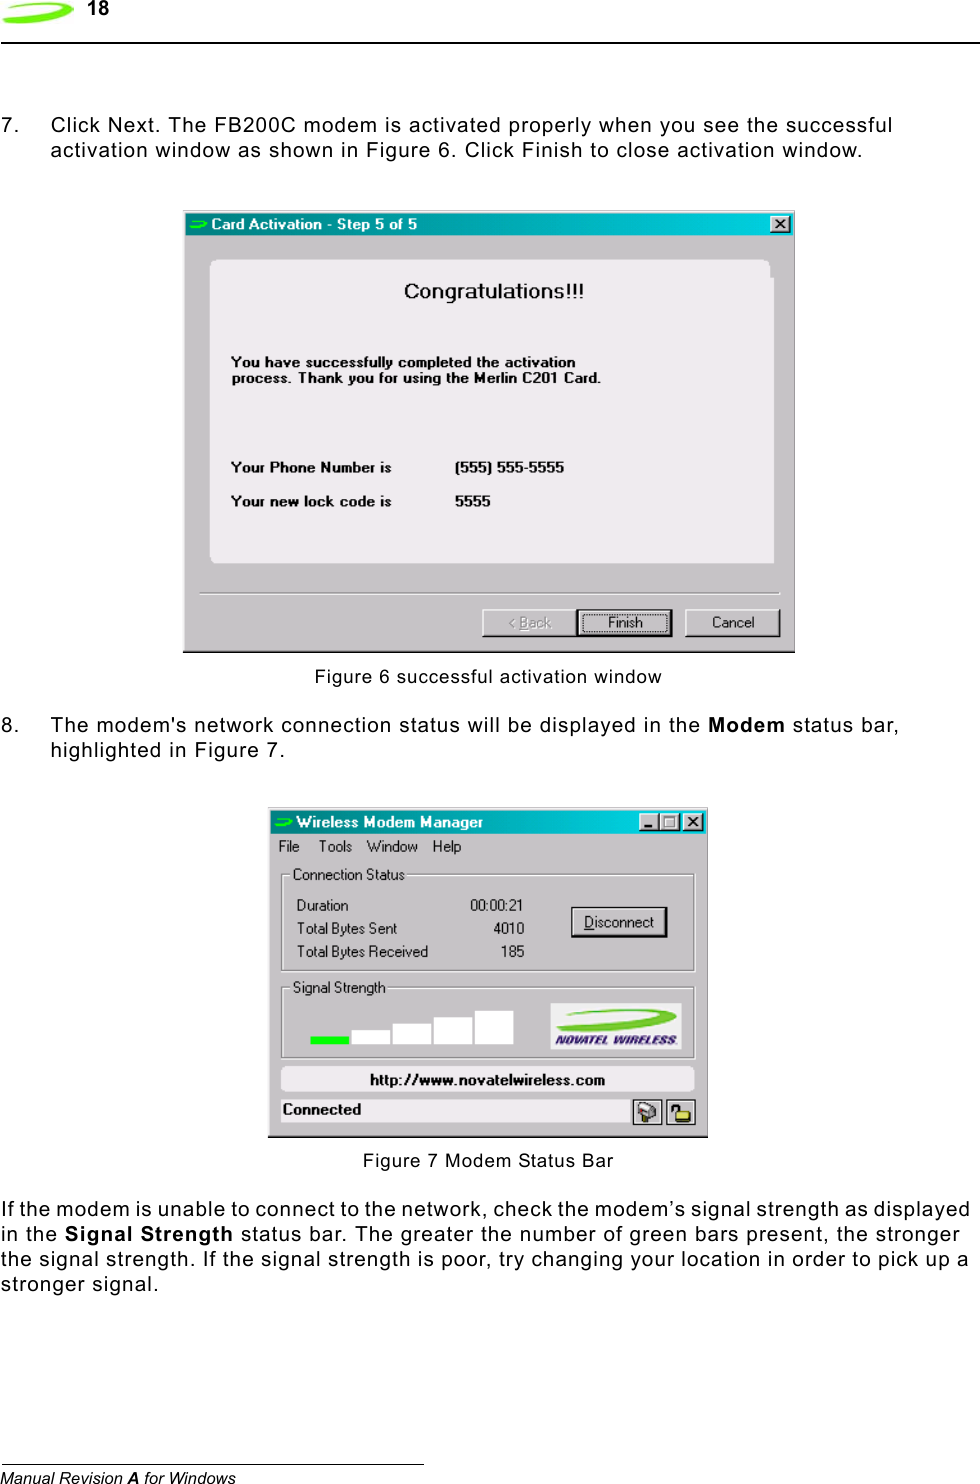 18  Manual Revision A for Windows7. Click Next. The FB200C modem is activated properly when you see the successful activation window as shown in Figure 6. Click Finish to close activation window. Figure 6 successful activation window8. The modem&apos;s network connection status will be displayed in the Modem status bar, highlighted in Figure 7.Figure 7 Modem Status BarIf the modem is unable to connect to the network, check the modem’s signal strength as displayed in the Signal Strength status bar. The greater the number of green bars present, the stronger the signal strength. If the signal strength is poor, try changing your location in order to pick up a stronger signal.